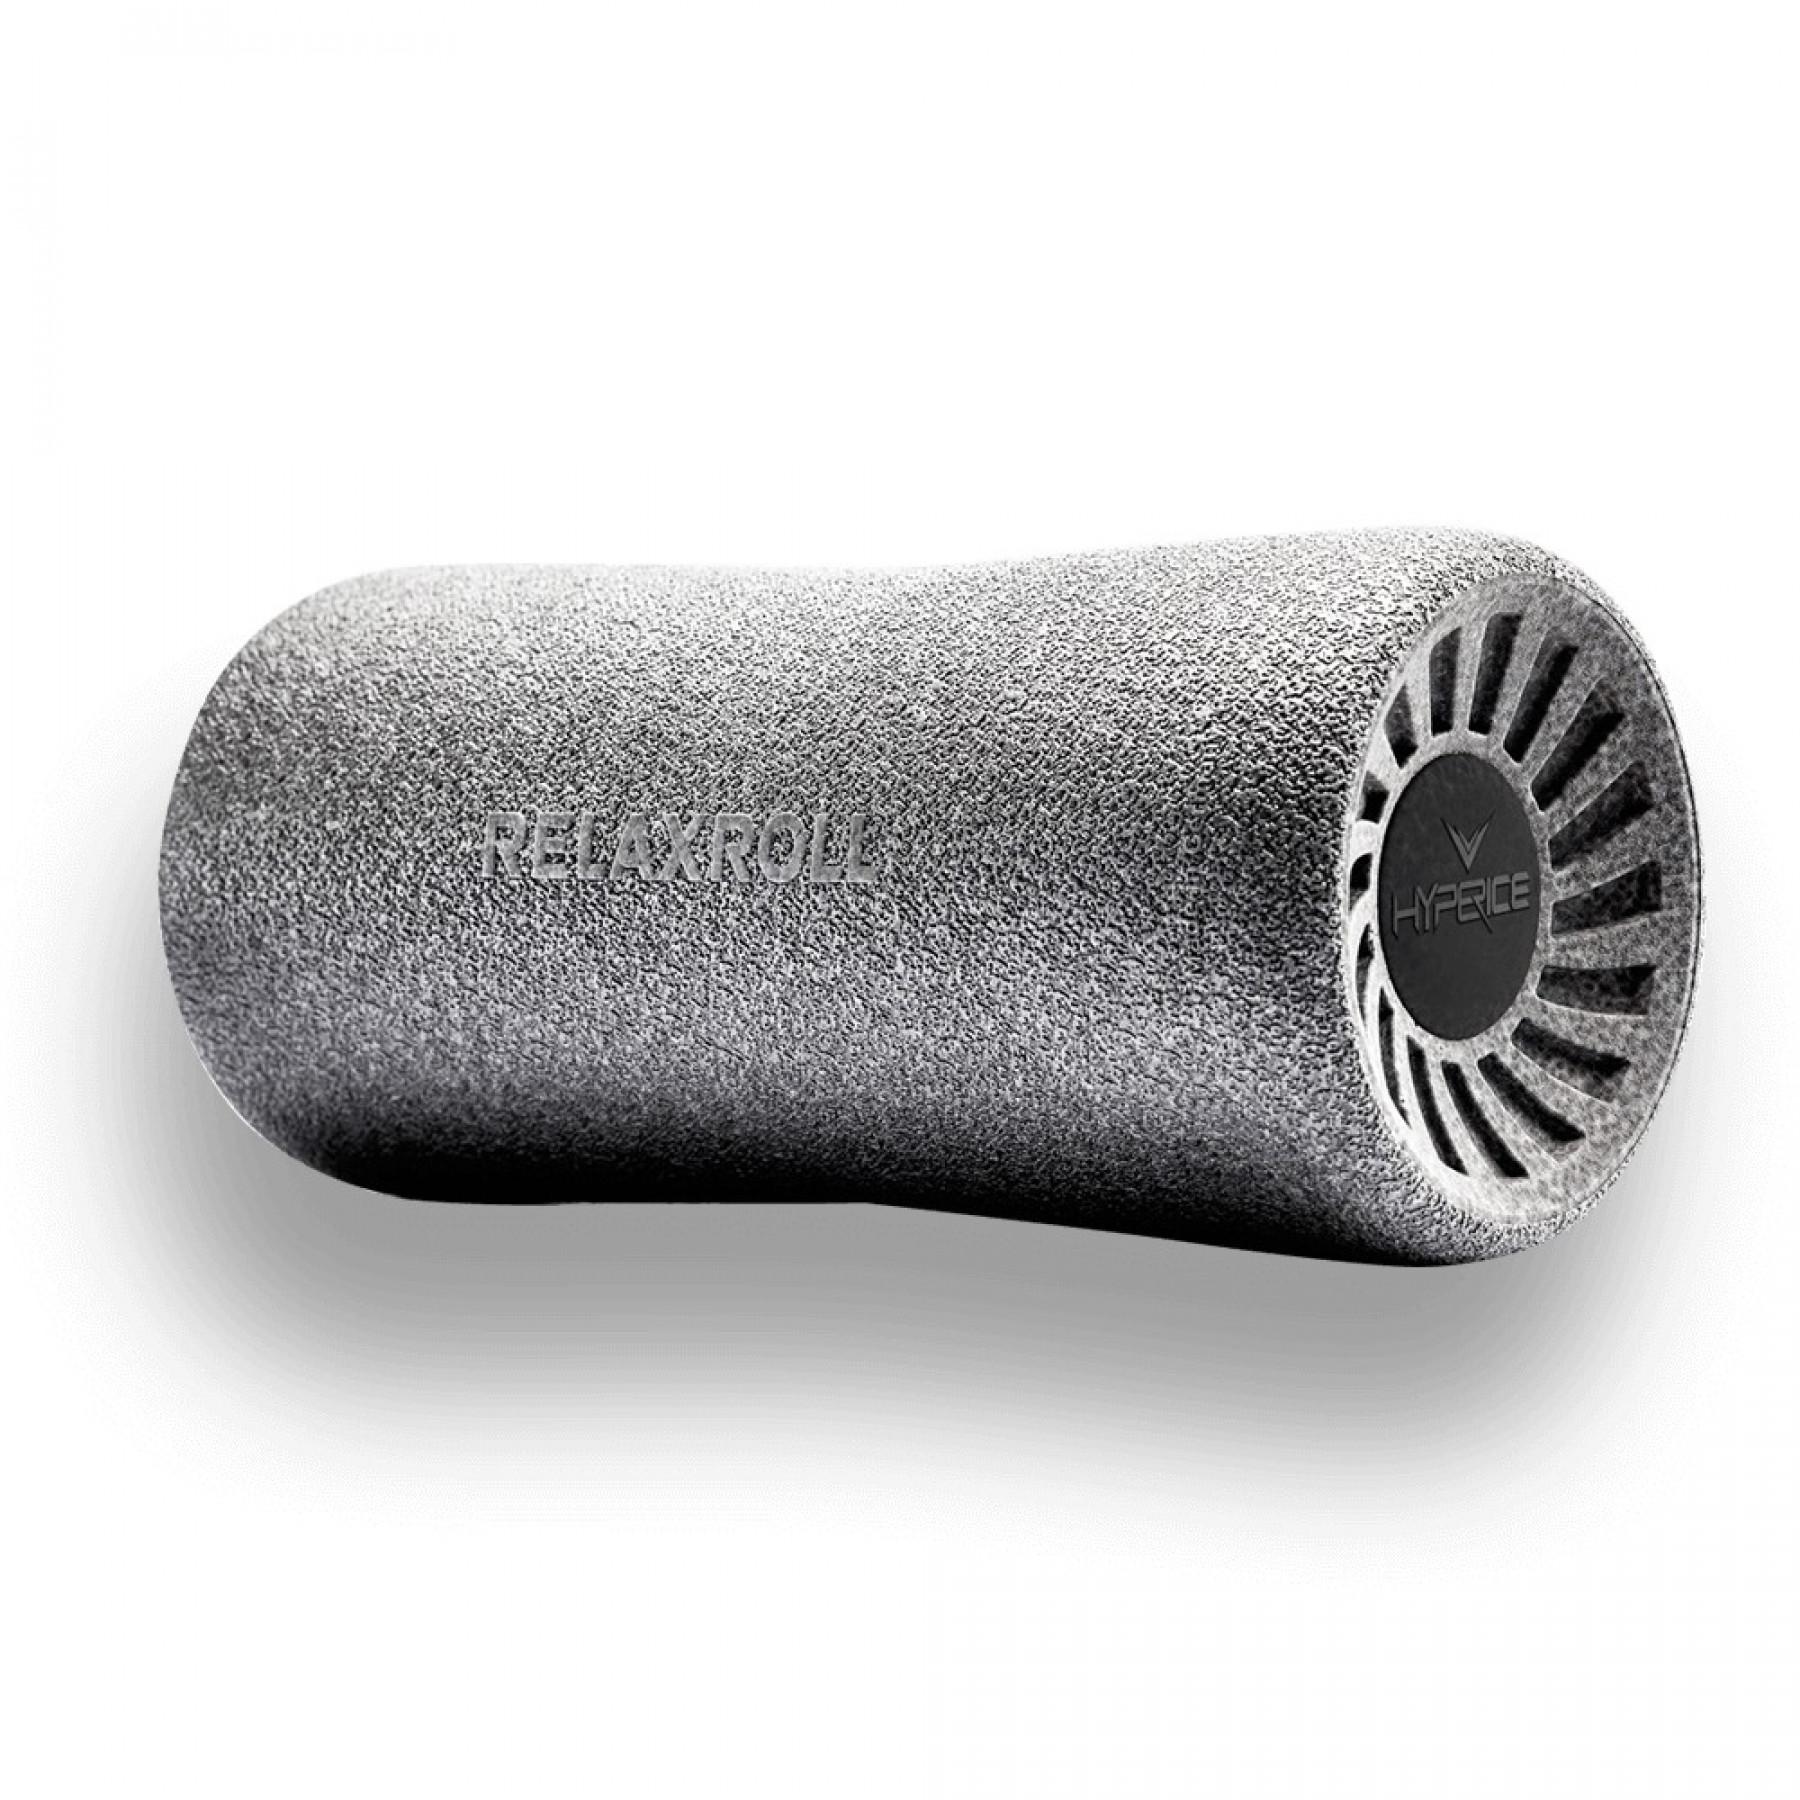 Fitness-Rolle Hyperice Relaxroll